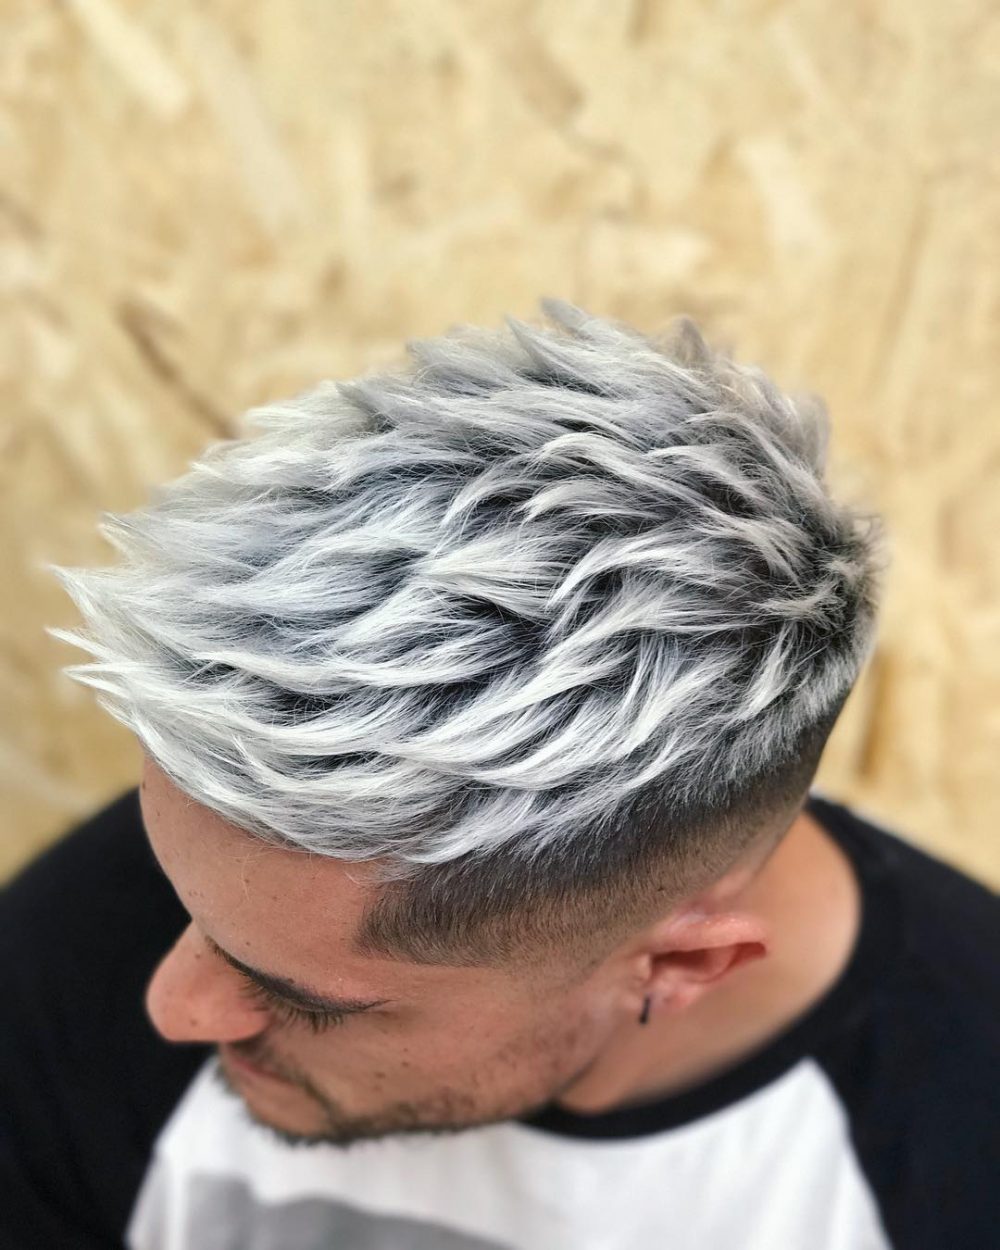 48 Awesome Hair Color Ideas for Men in 2018 - Men's Hairstyles